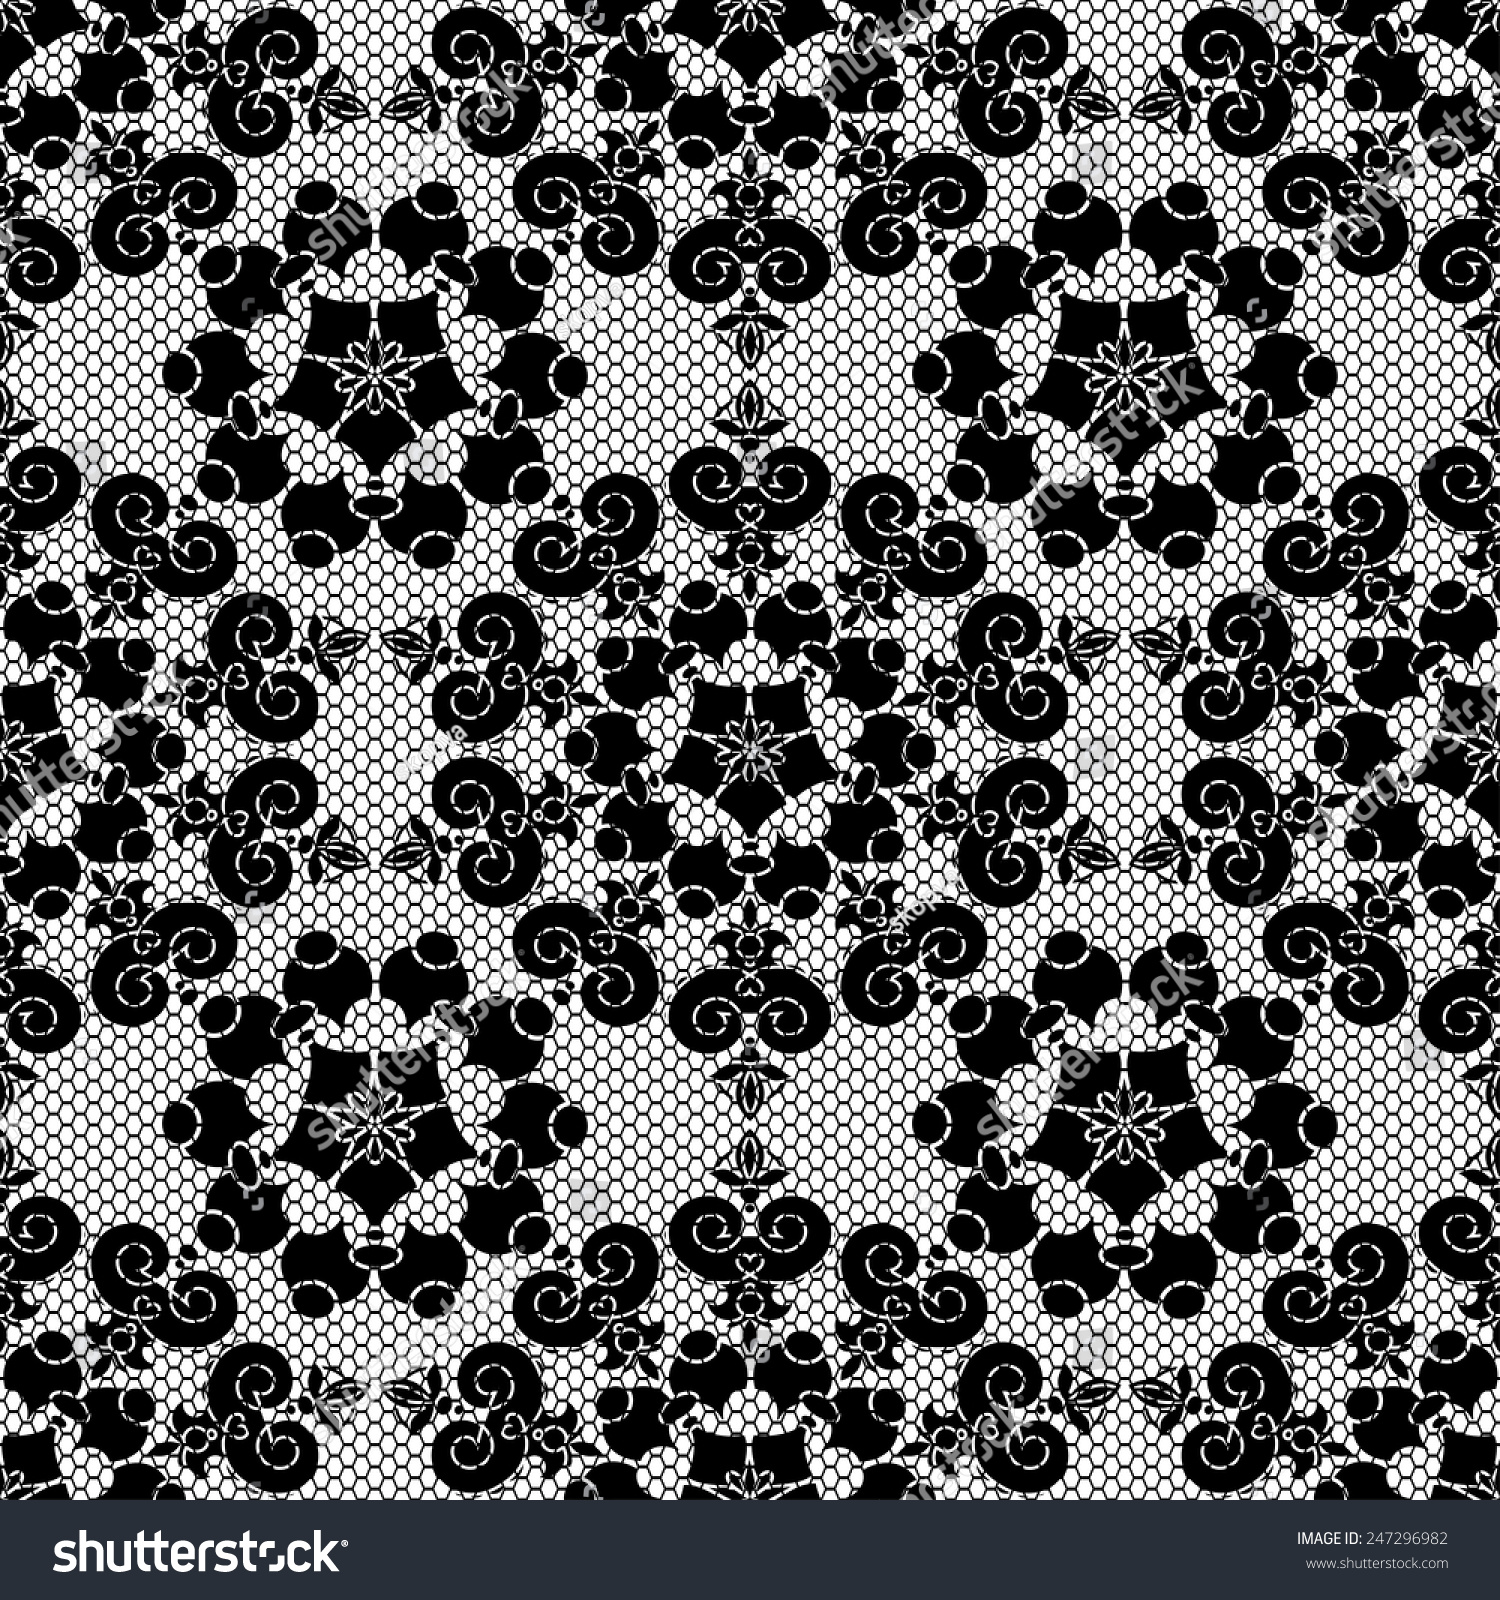 Black And White Lacy Pattern. Vector Illustration. - 247296982 ...